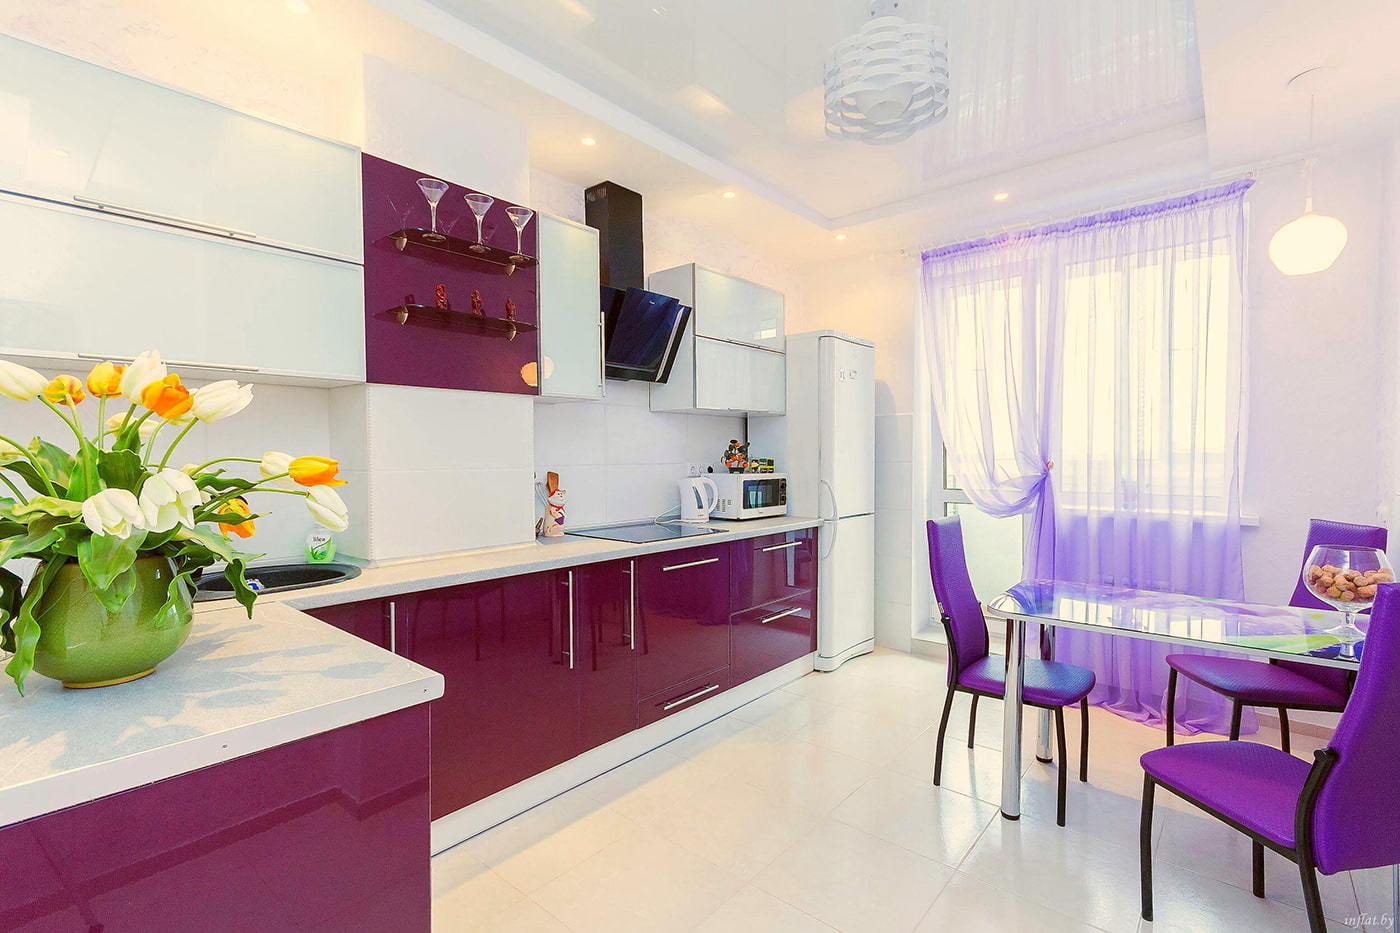 Purple and white in the kitchen